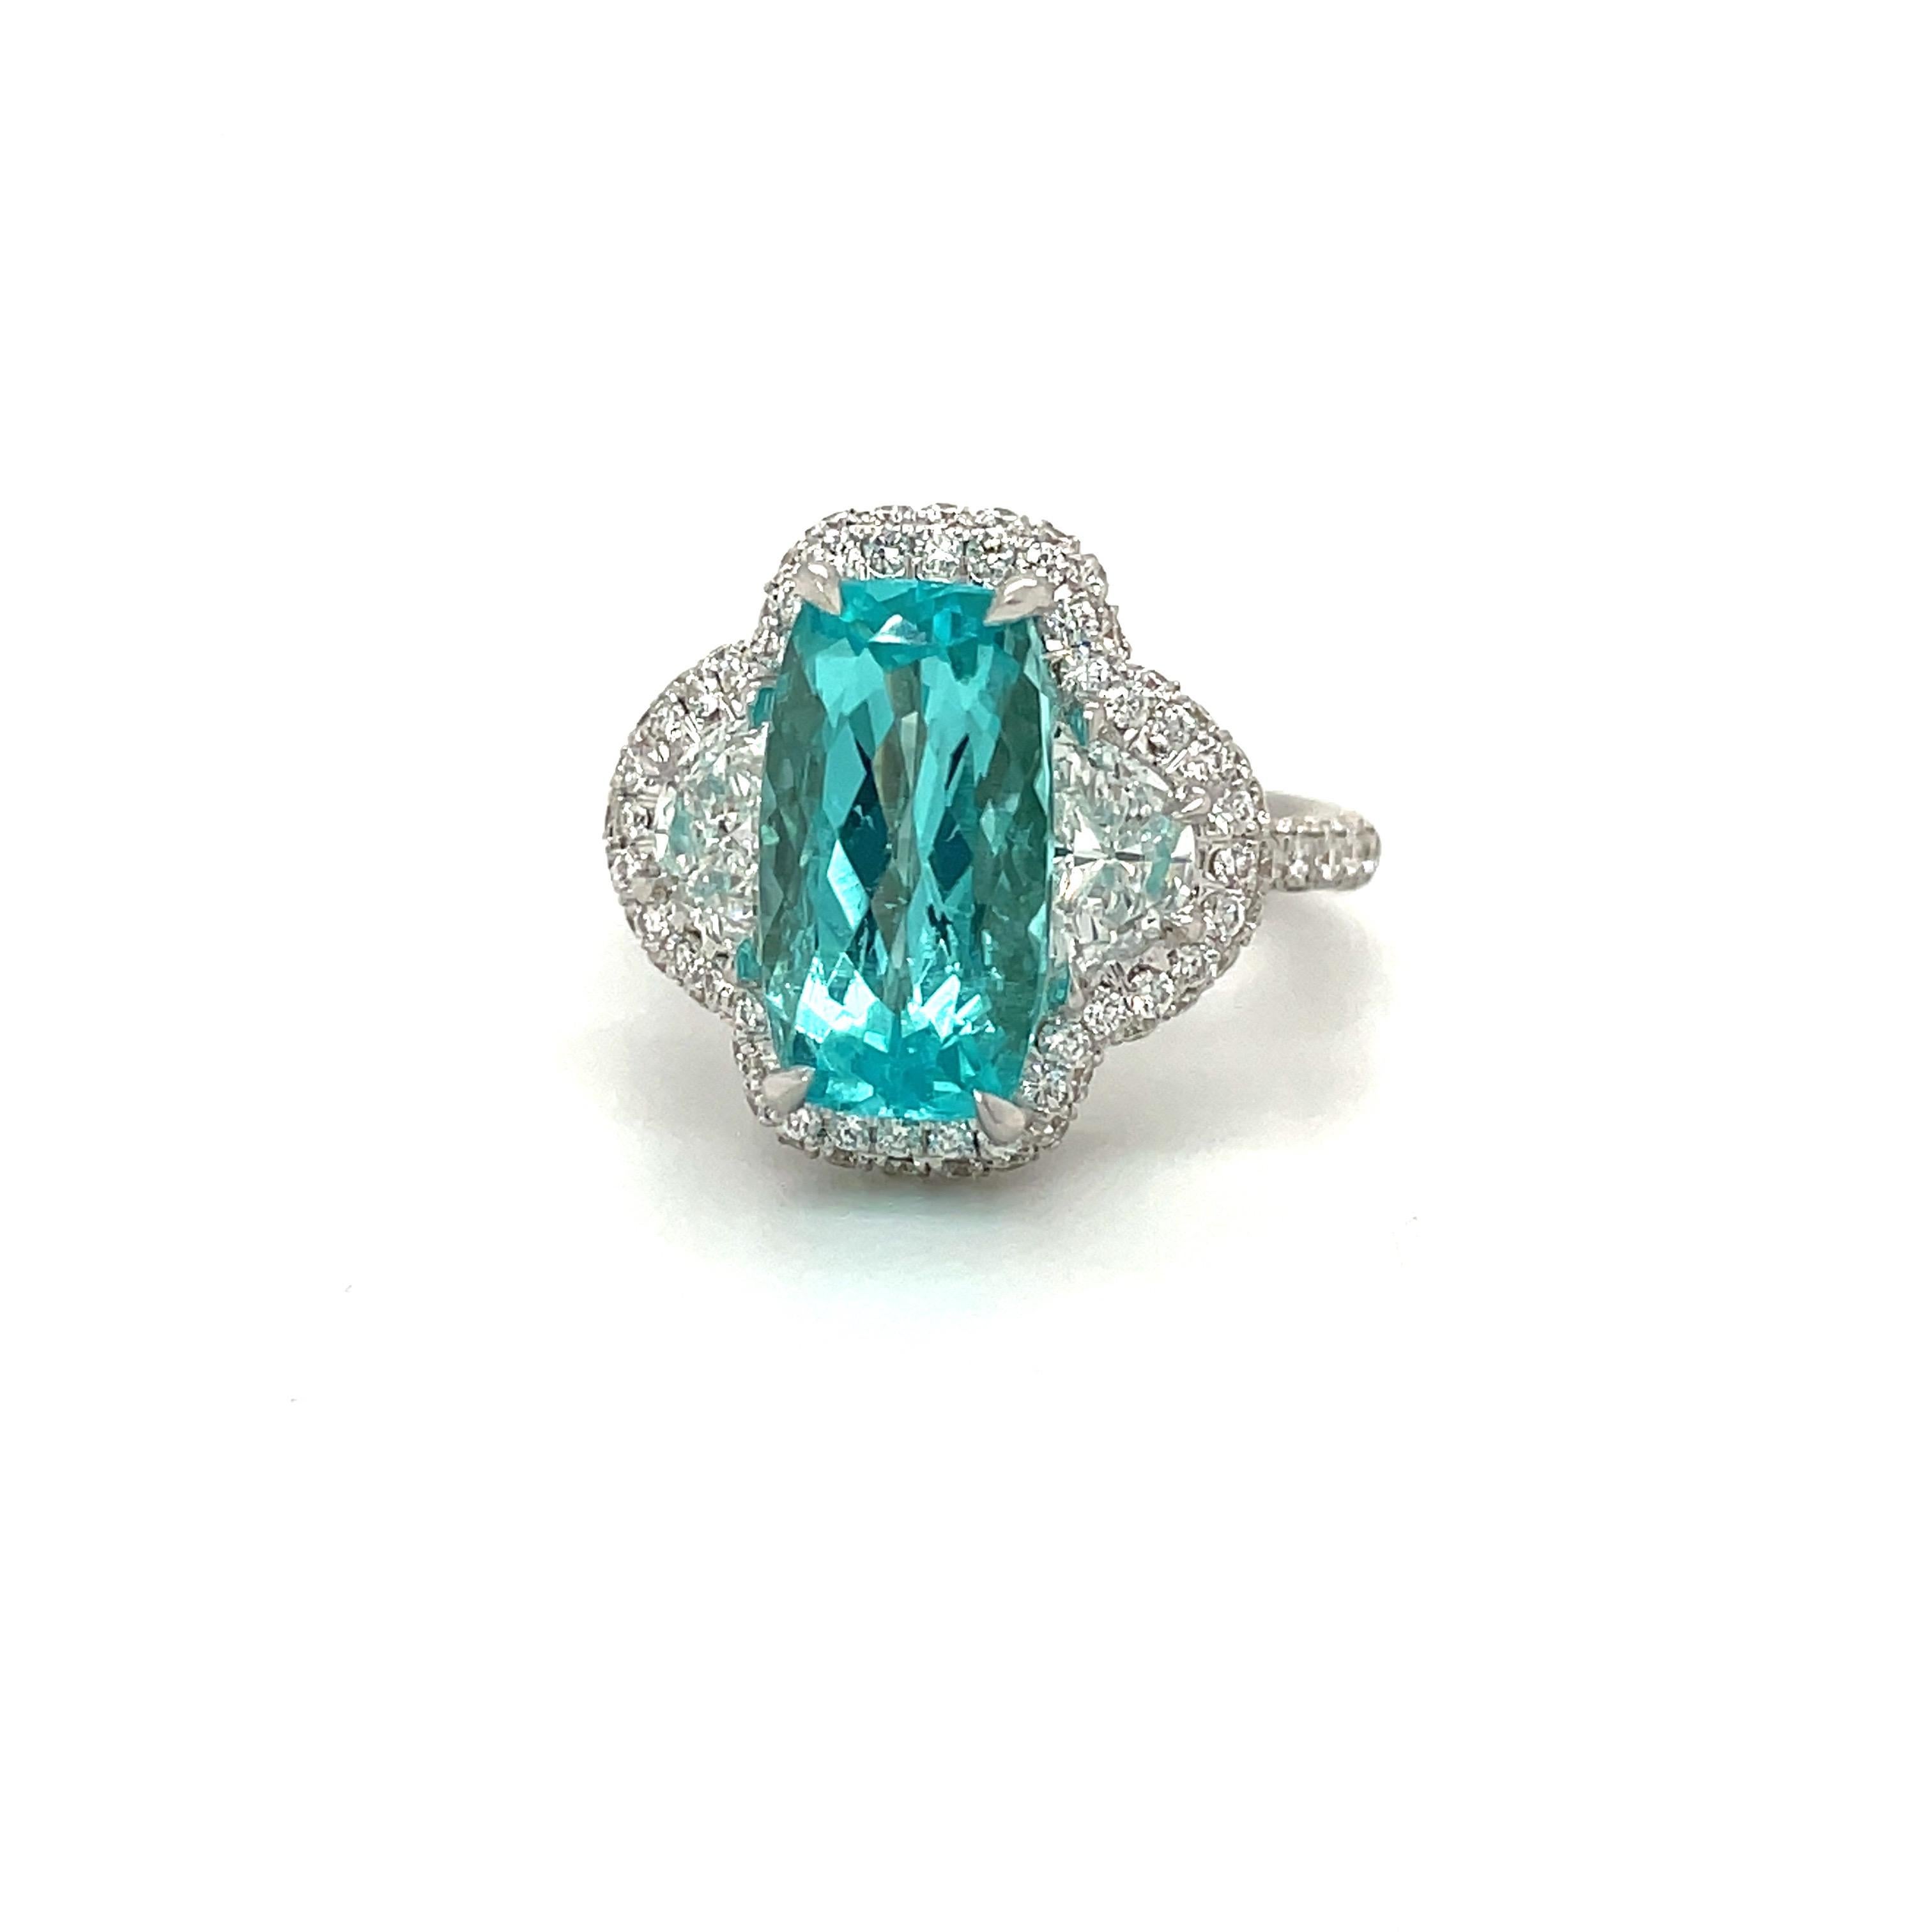 Mixed Cut 18kt White Gold 3.94ct. Rectangular Faceted Paraiba & 0.83ct. Diamond Ring For Sale